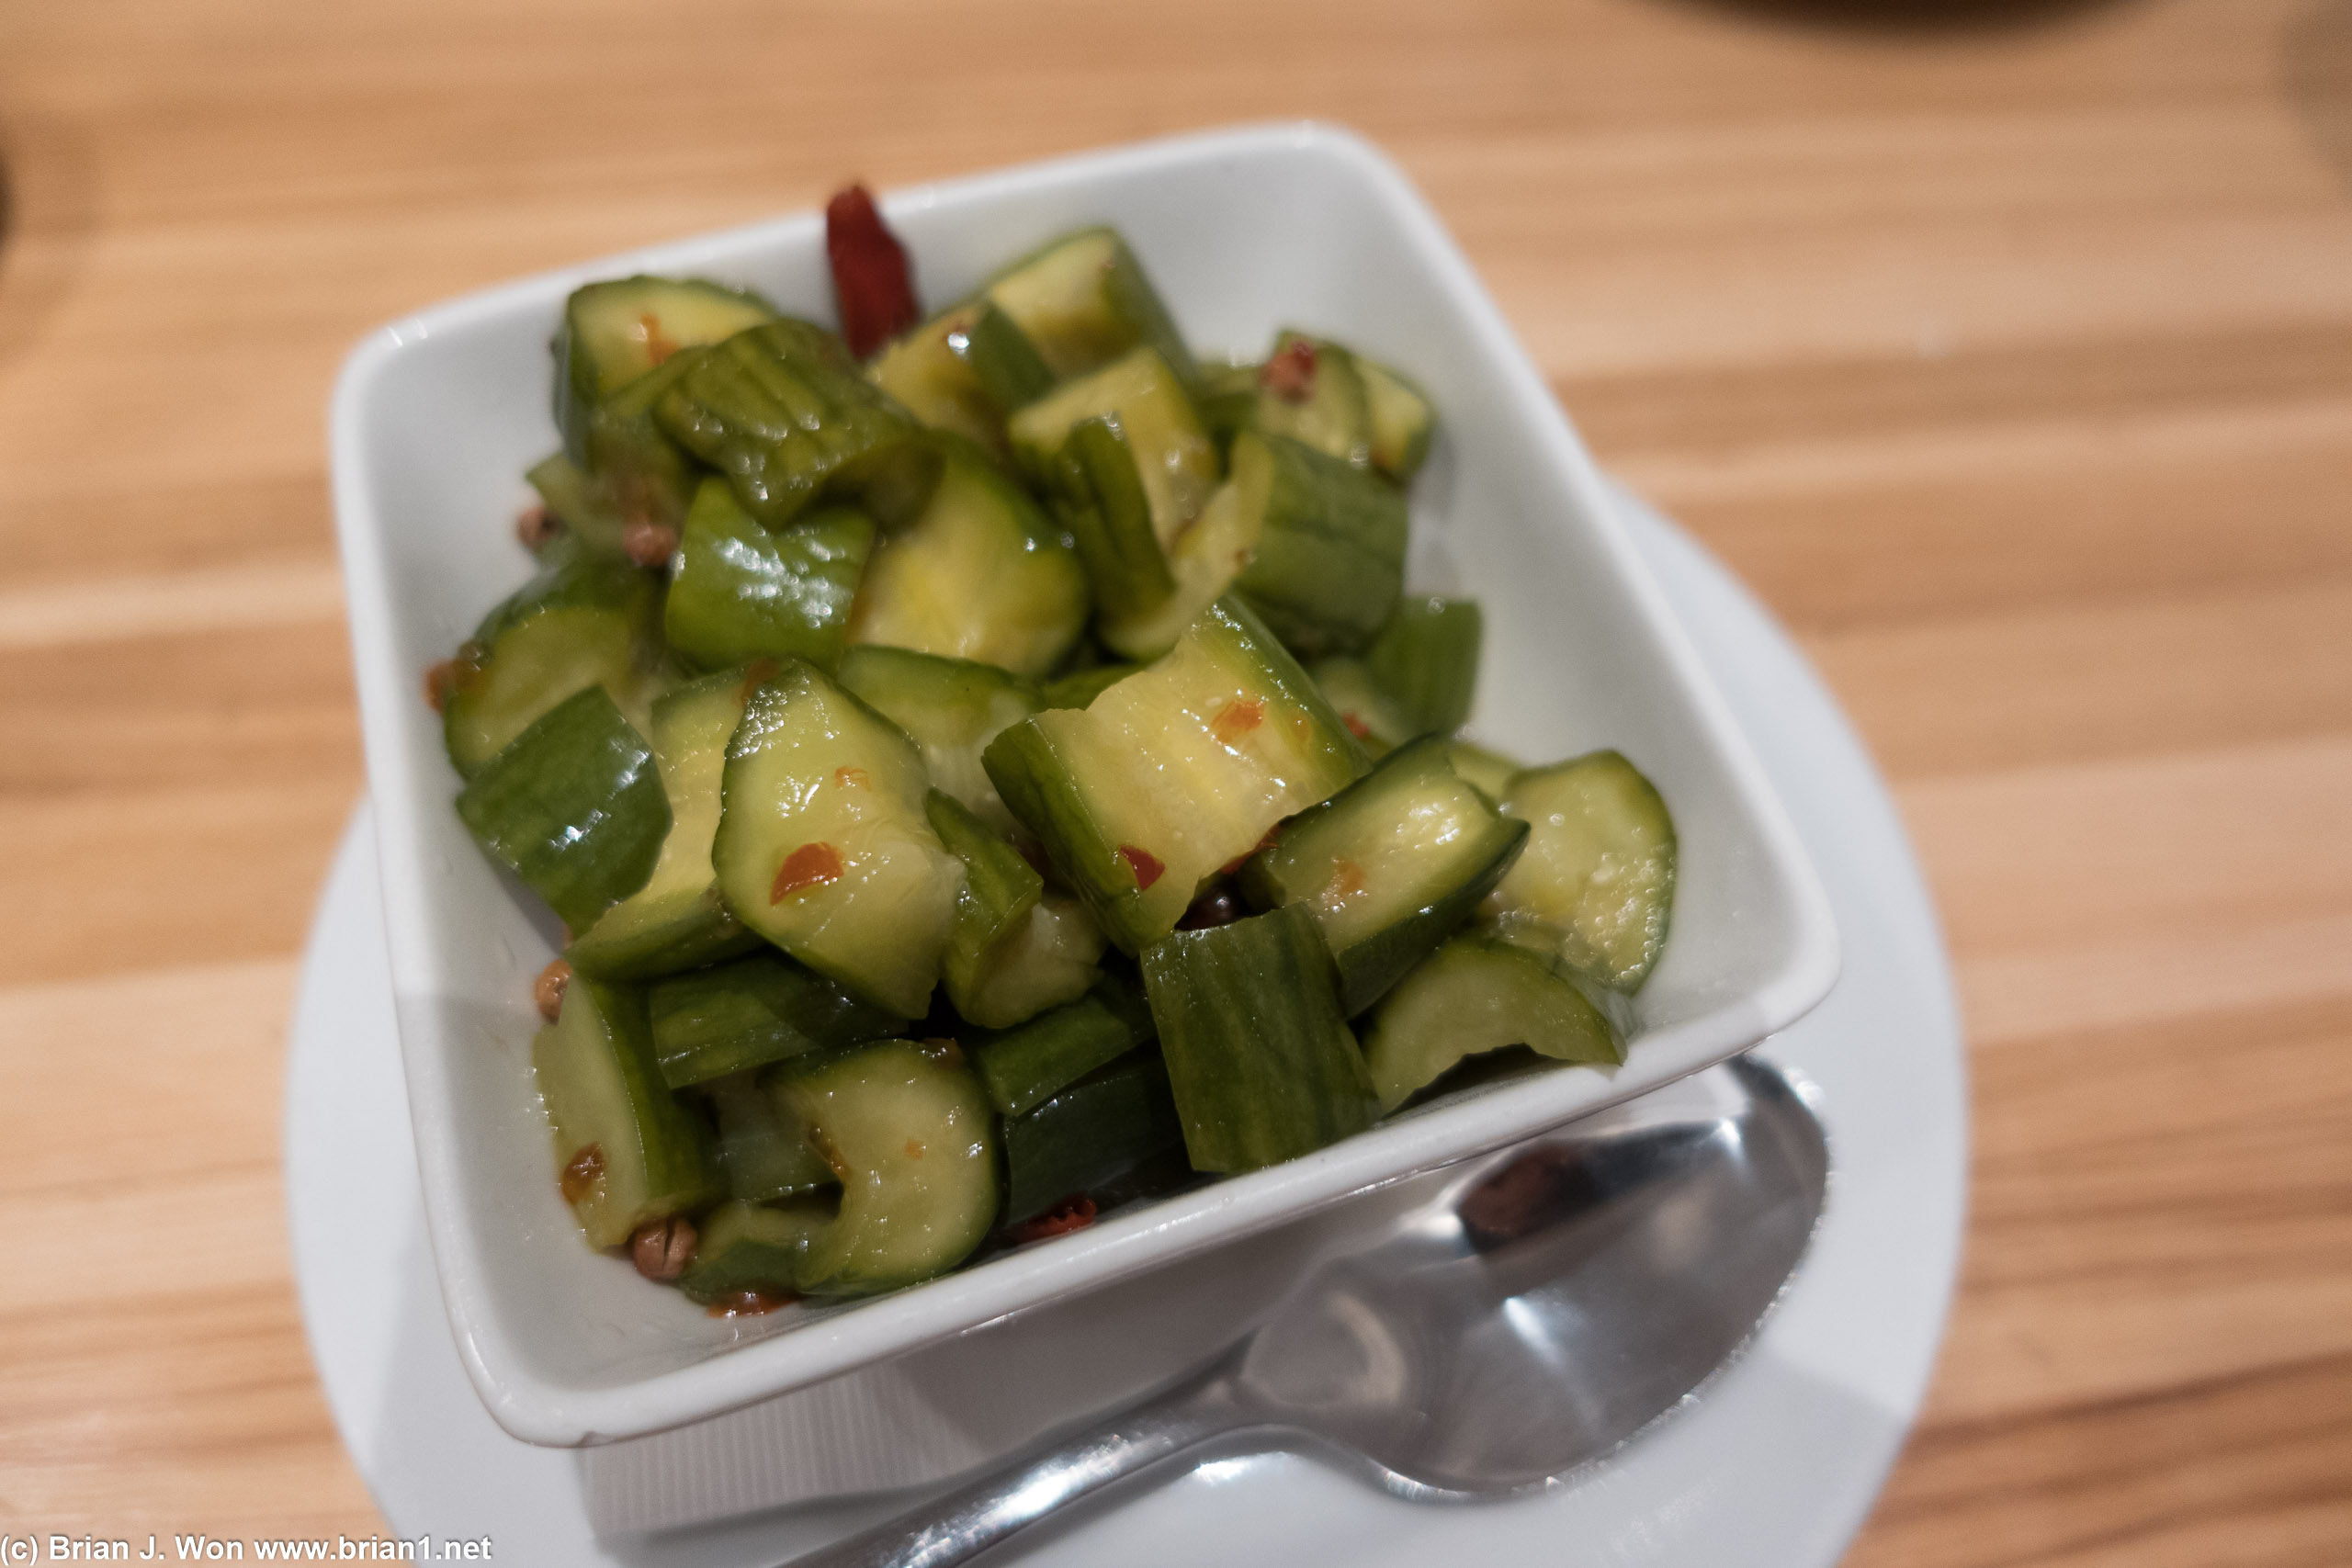 Pickled spicy cucumber is okay.